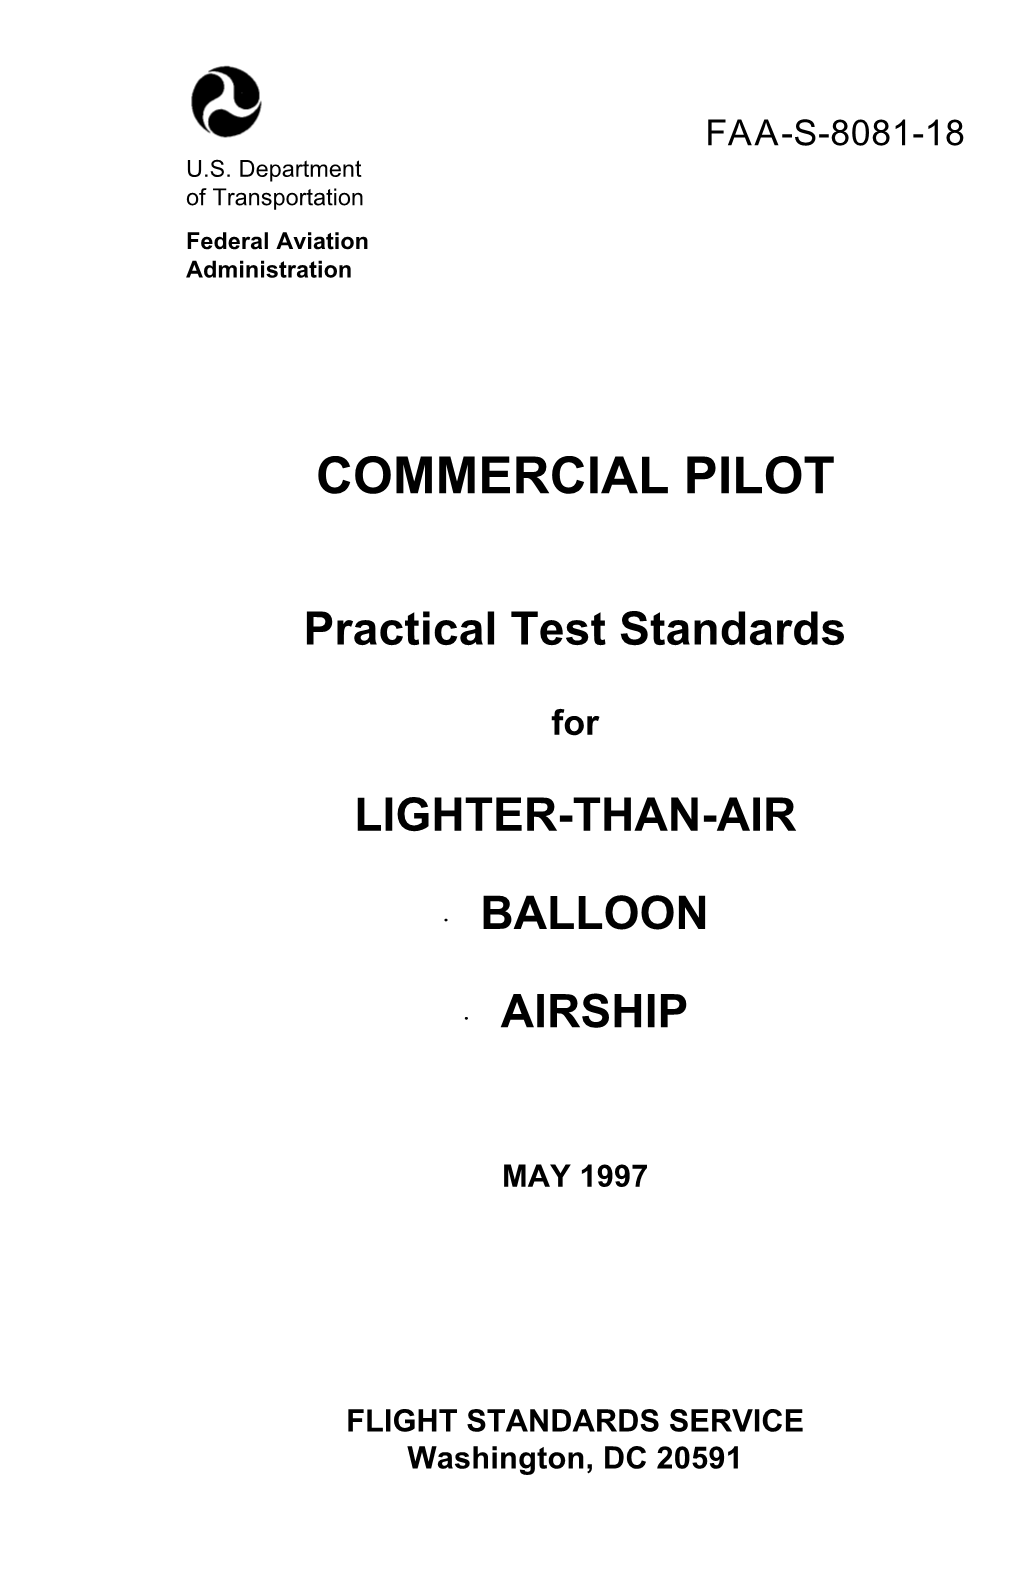 Commerical Pilot Practical Test Standards for Lighter-Than-Air